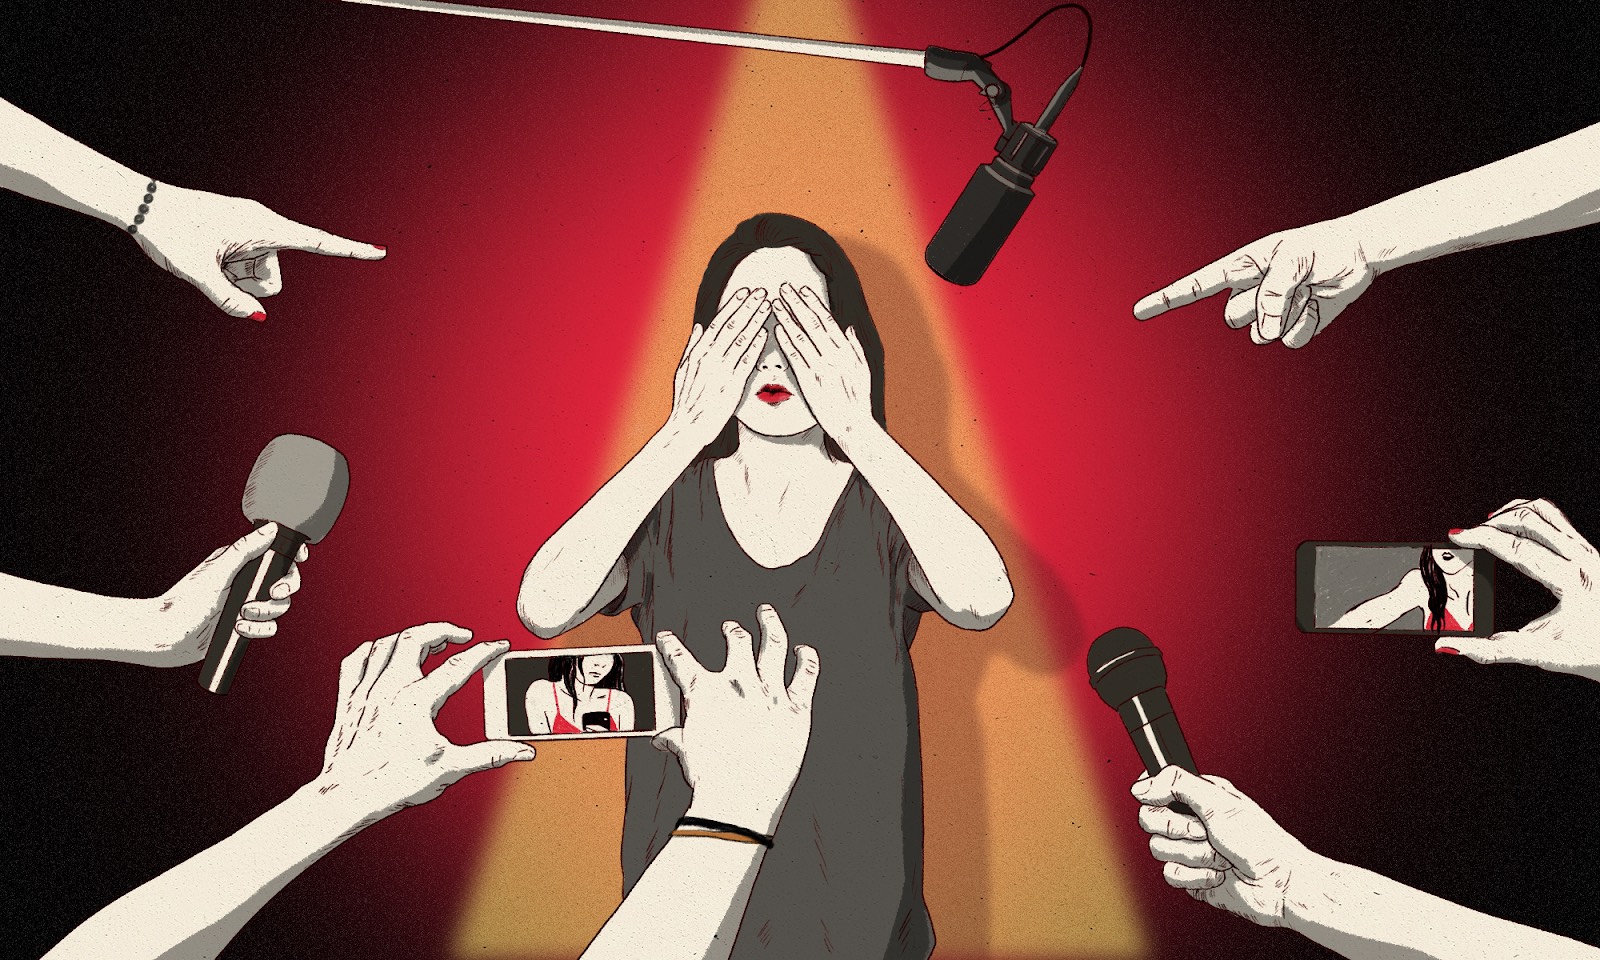 A woman covering her eyes stands in a spotlight, while hands point microphones and phone cameras at her in this illustration by Igor Vujčić